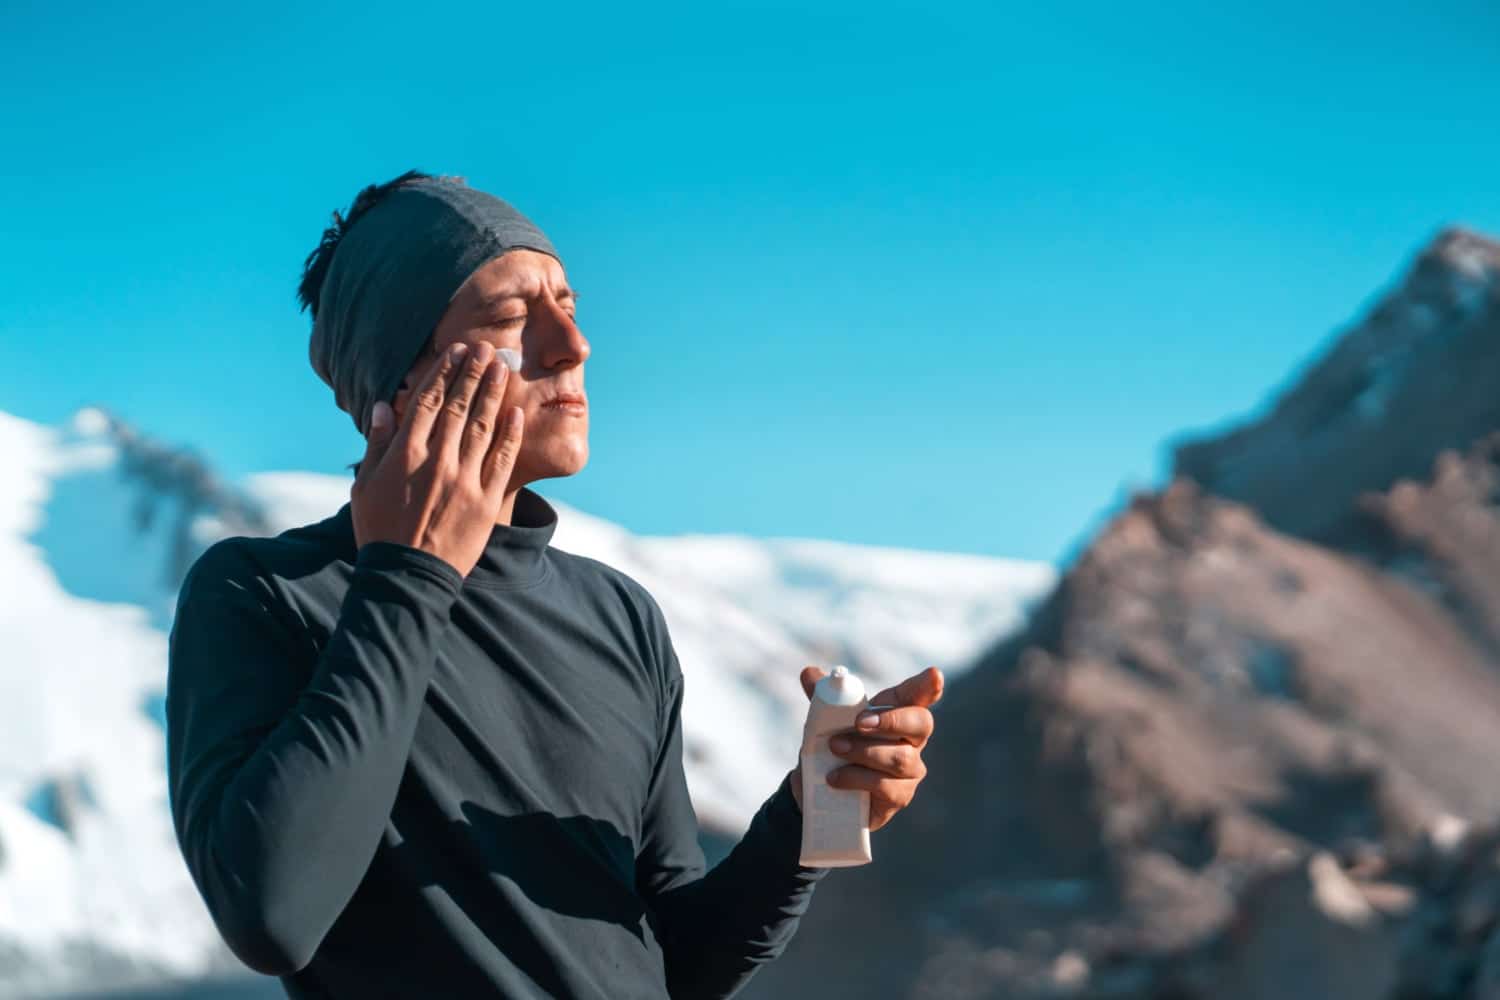 man applying sunscreen while hiking outdoors